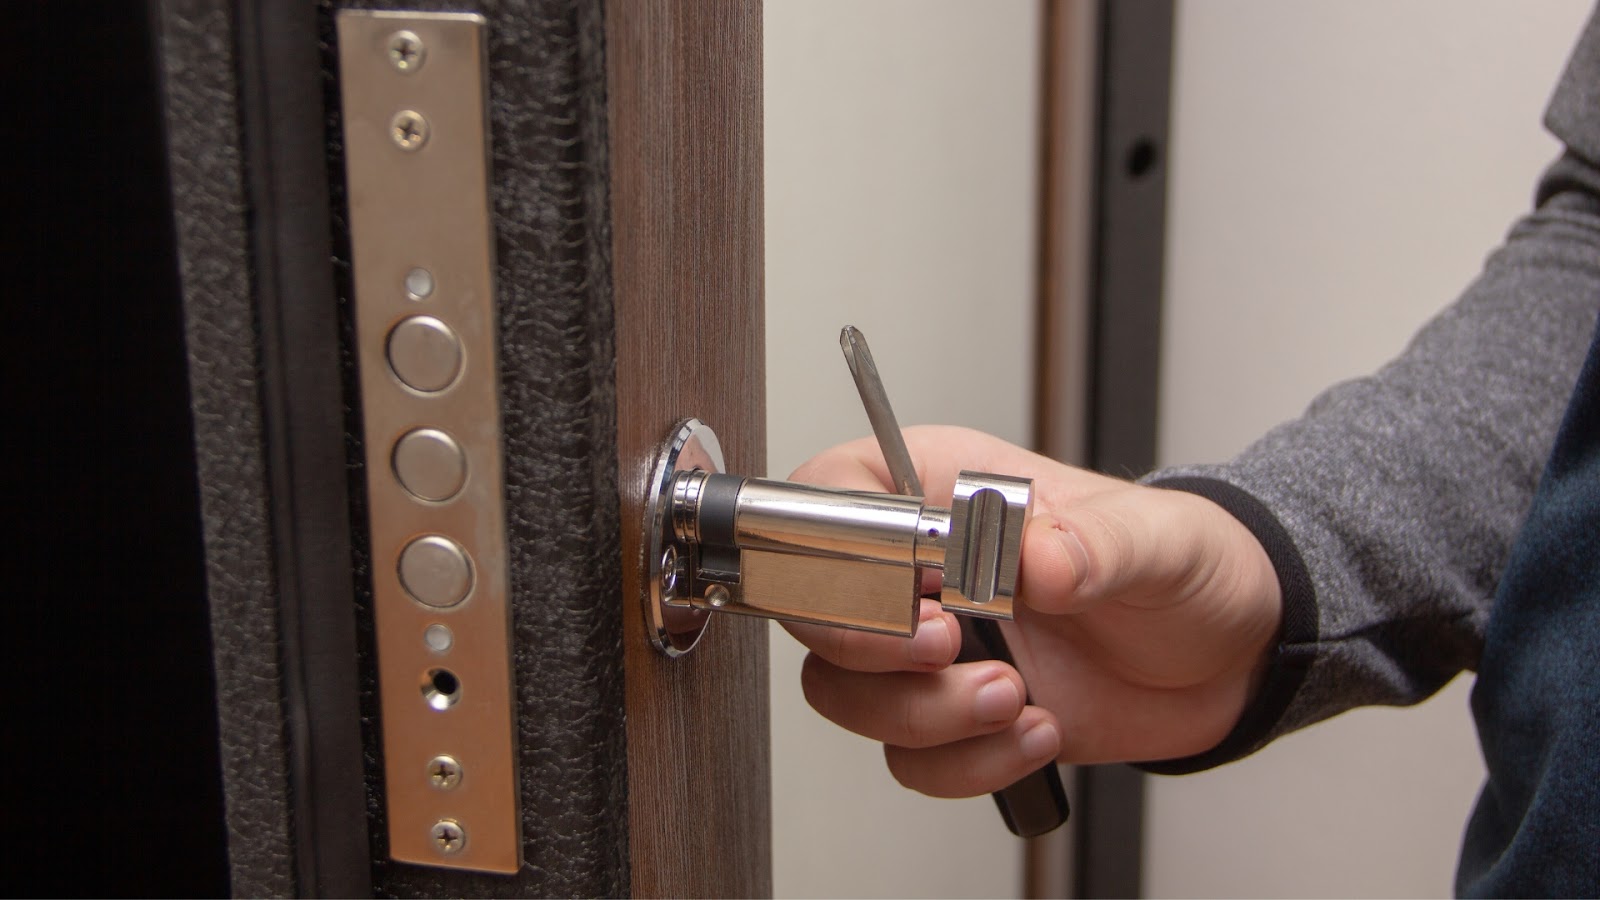 A residential locksmith performs lock rekey services by using a tool to adjust the internal components of a door lock.